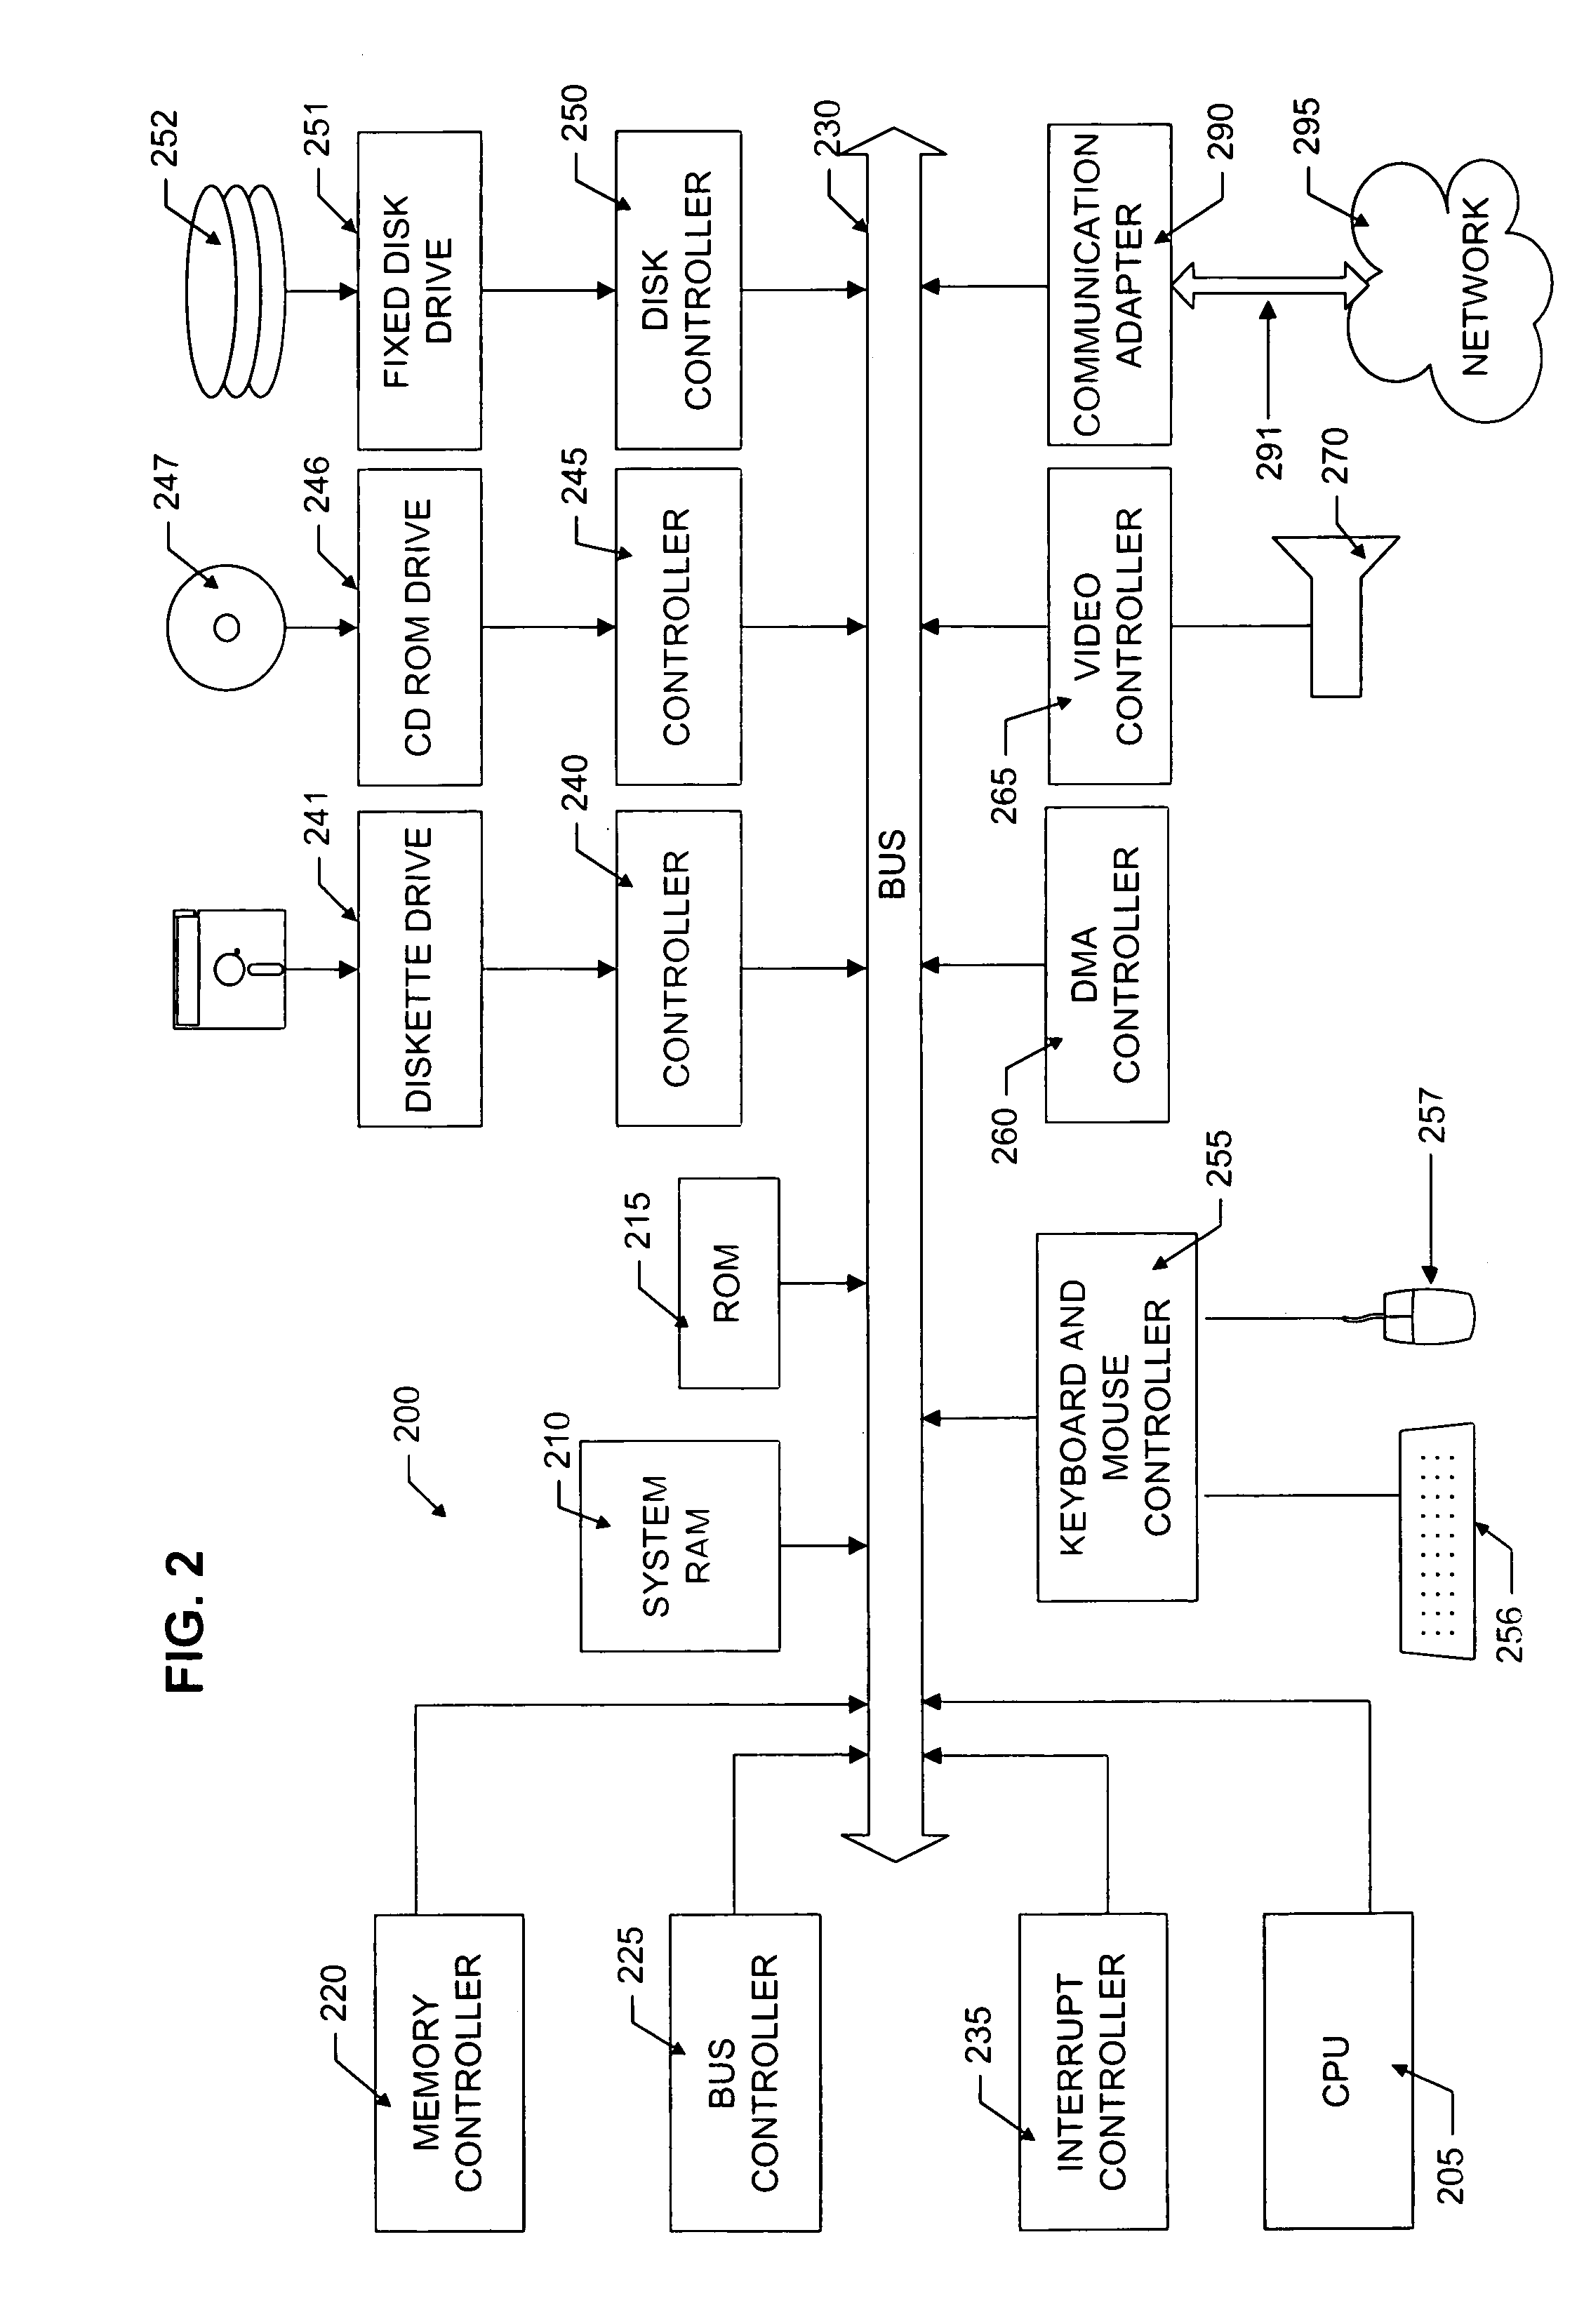 Method and apparatus for dynamic distributed computing over a network